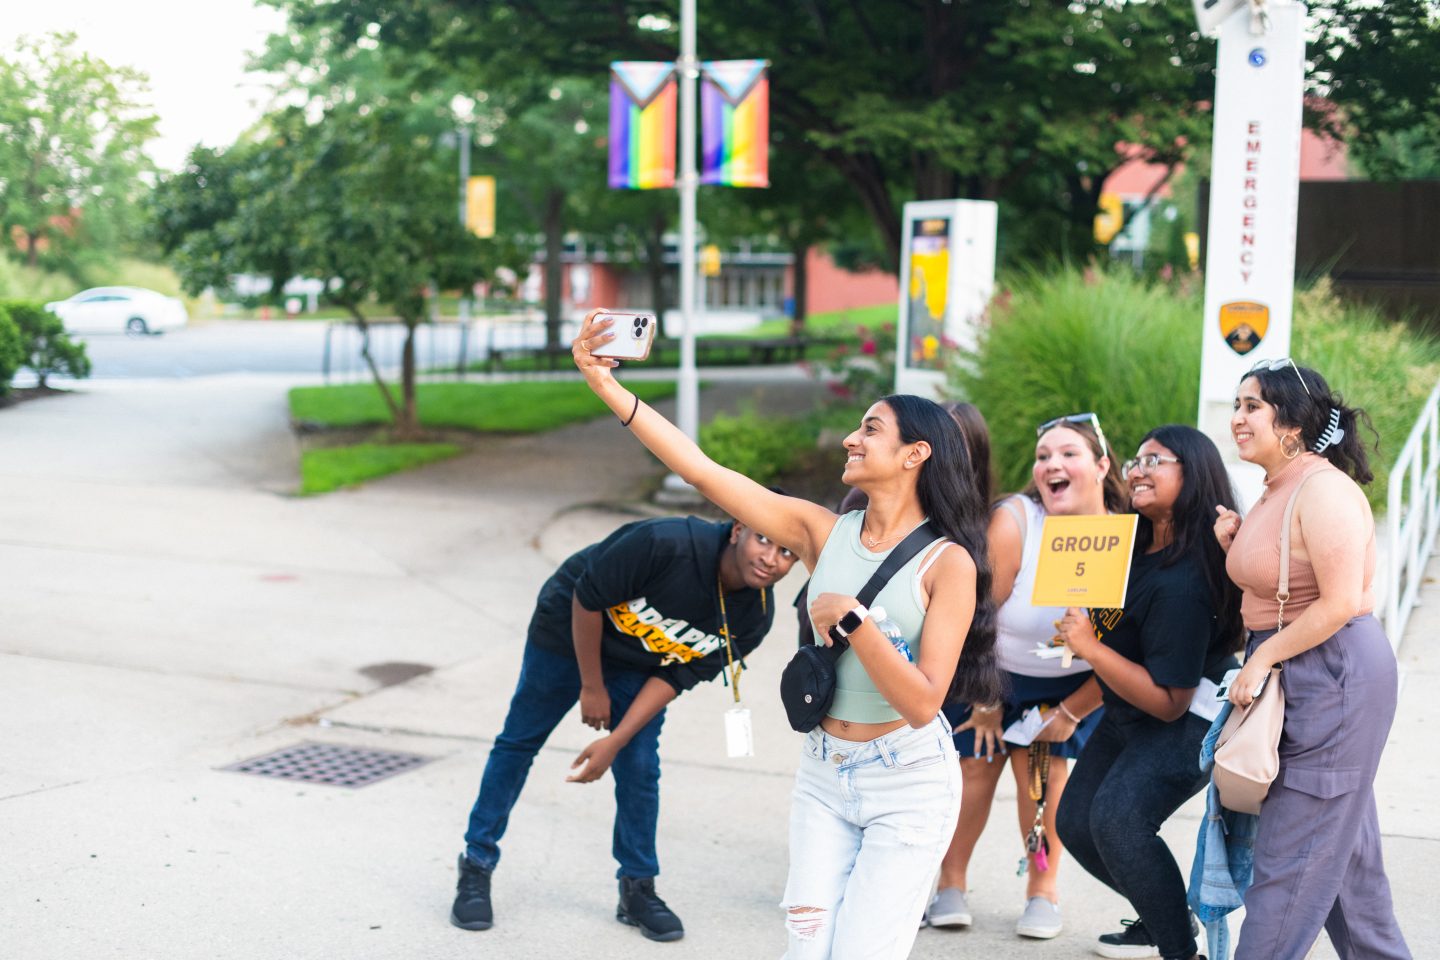 A diverse group of six cheerful friends taking a group selfie outdoors, with a young woman holding out a smartphone and the rest posing with her, next to an emergency call station and under pride flags in a green campus-like setting. Text in Image: On the sign held by one individual: "GROUP 5." On the emergency pole behind them: "EMERGENCY."